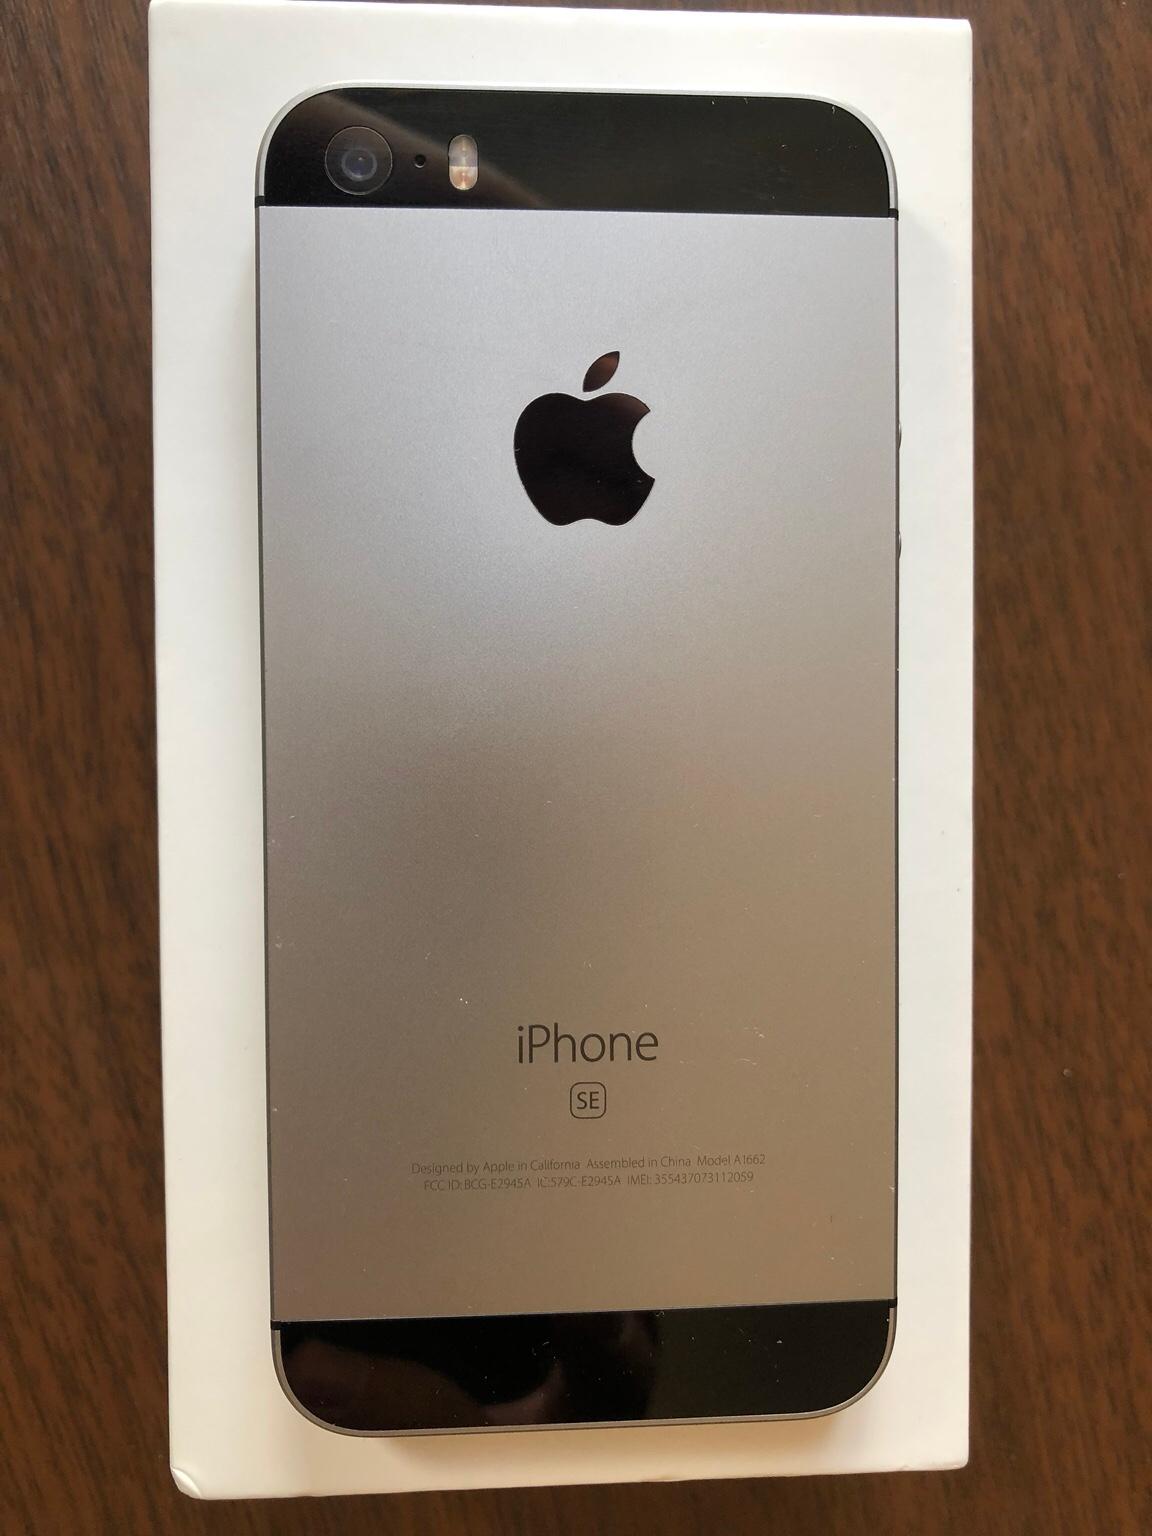 Apple Iphone Se 16gb Space Grey Unlocked In Al7 Hatfield For 130 00 For Sale Shpock